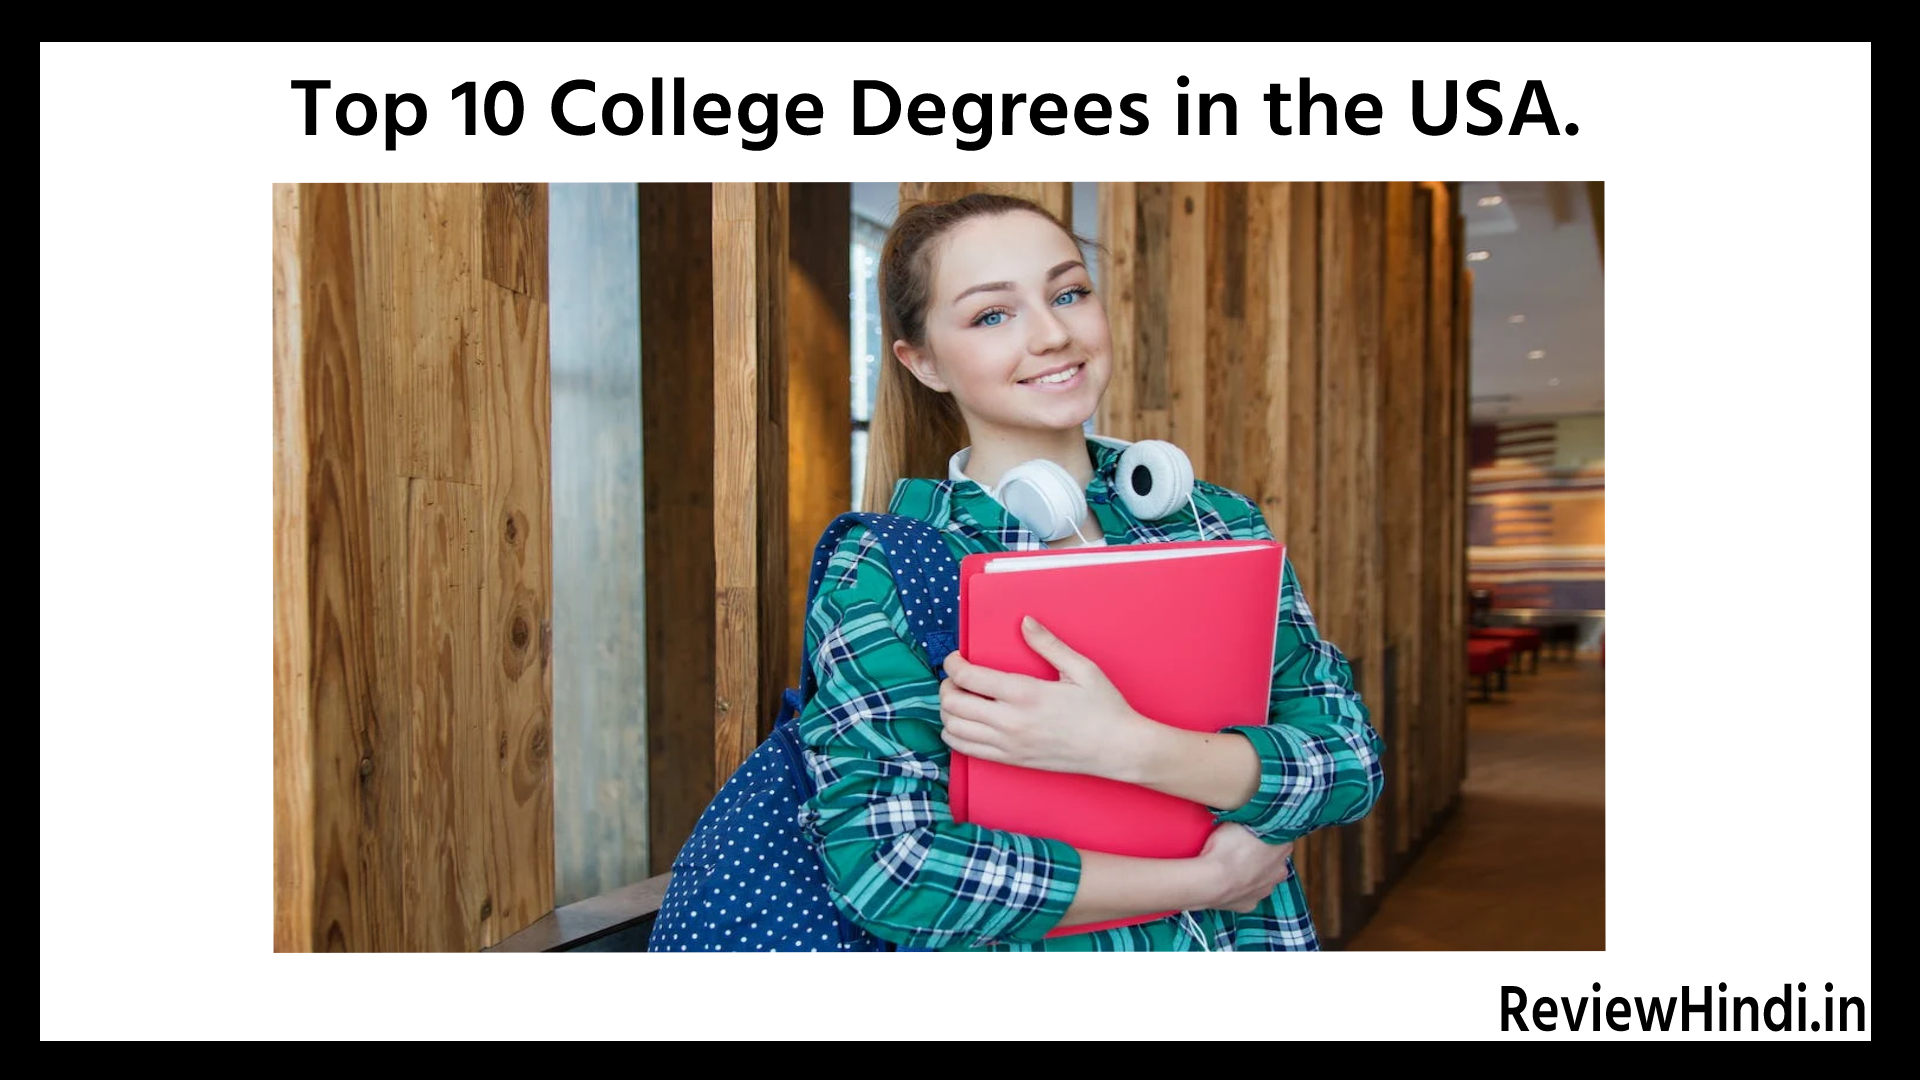 Top 10 College Degrees in the USA.